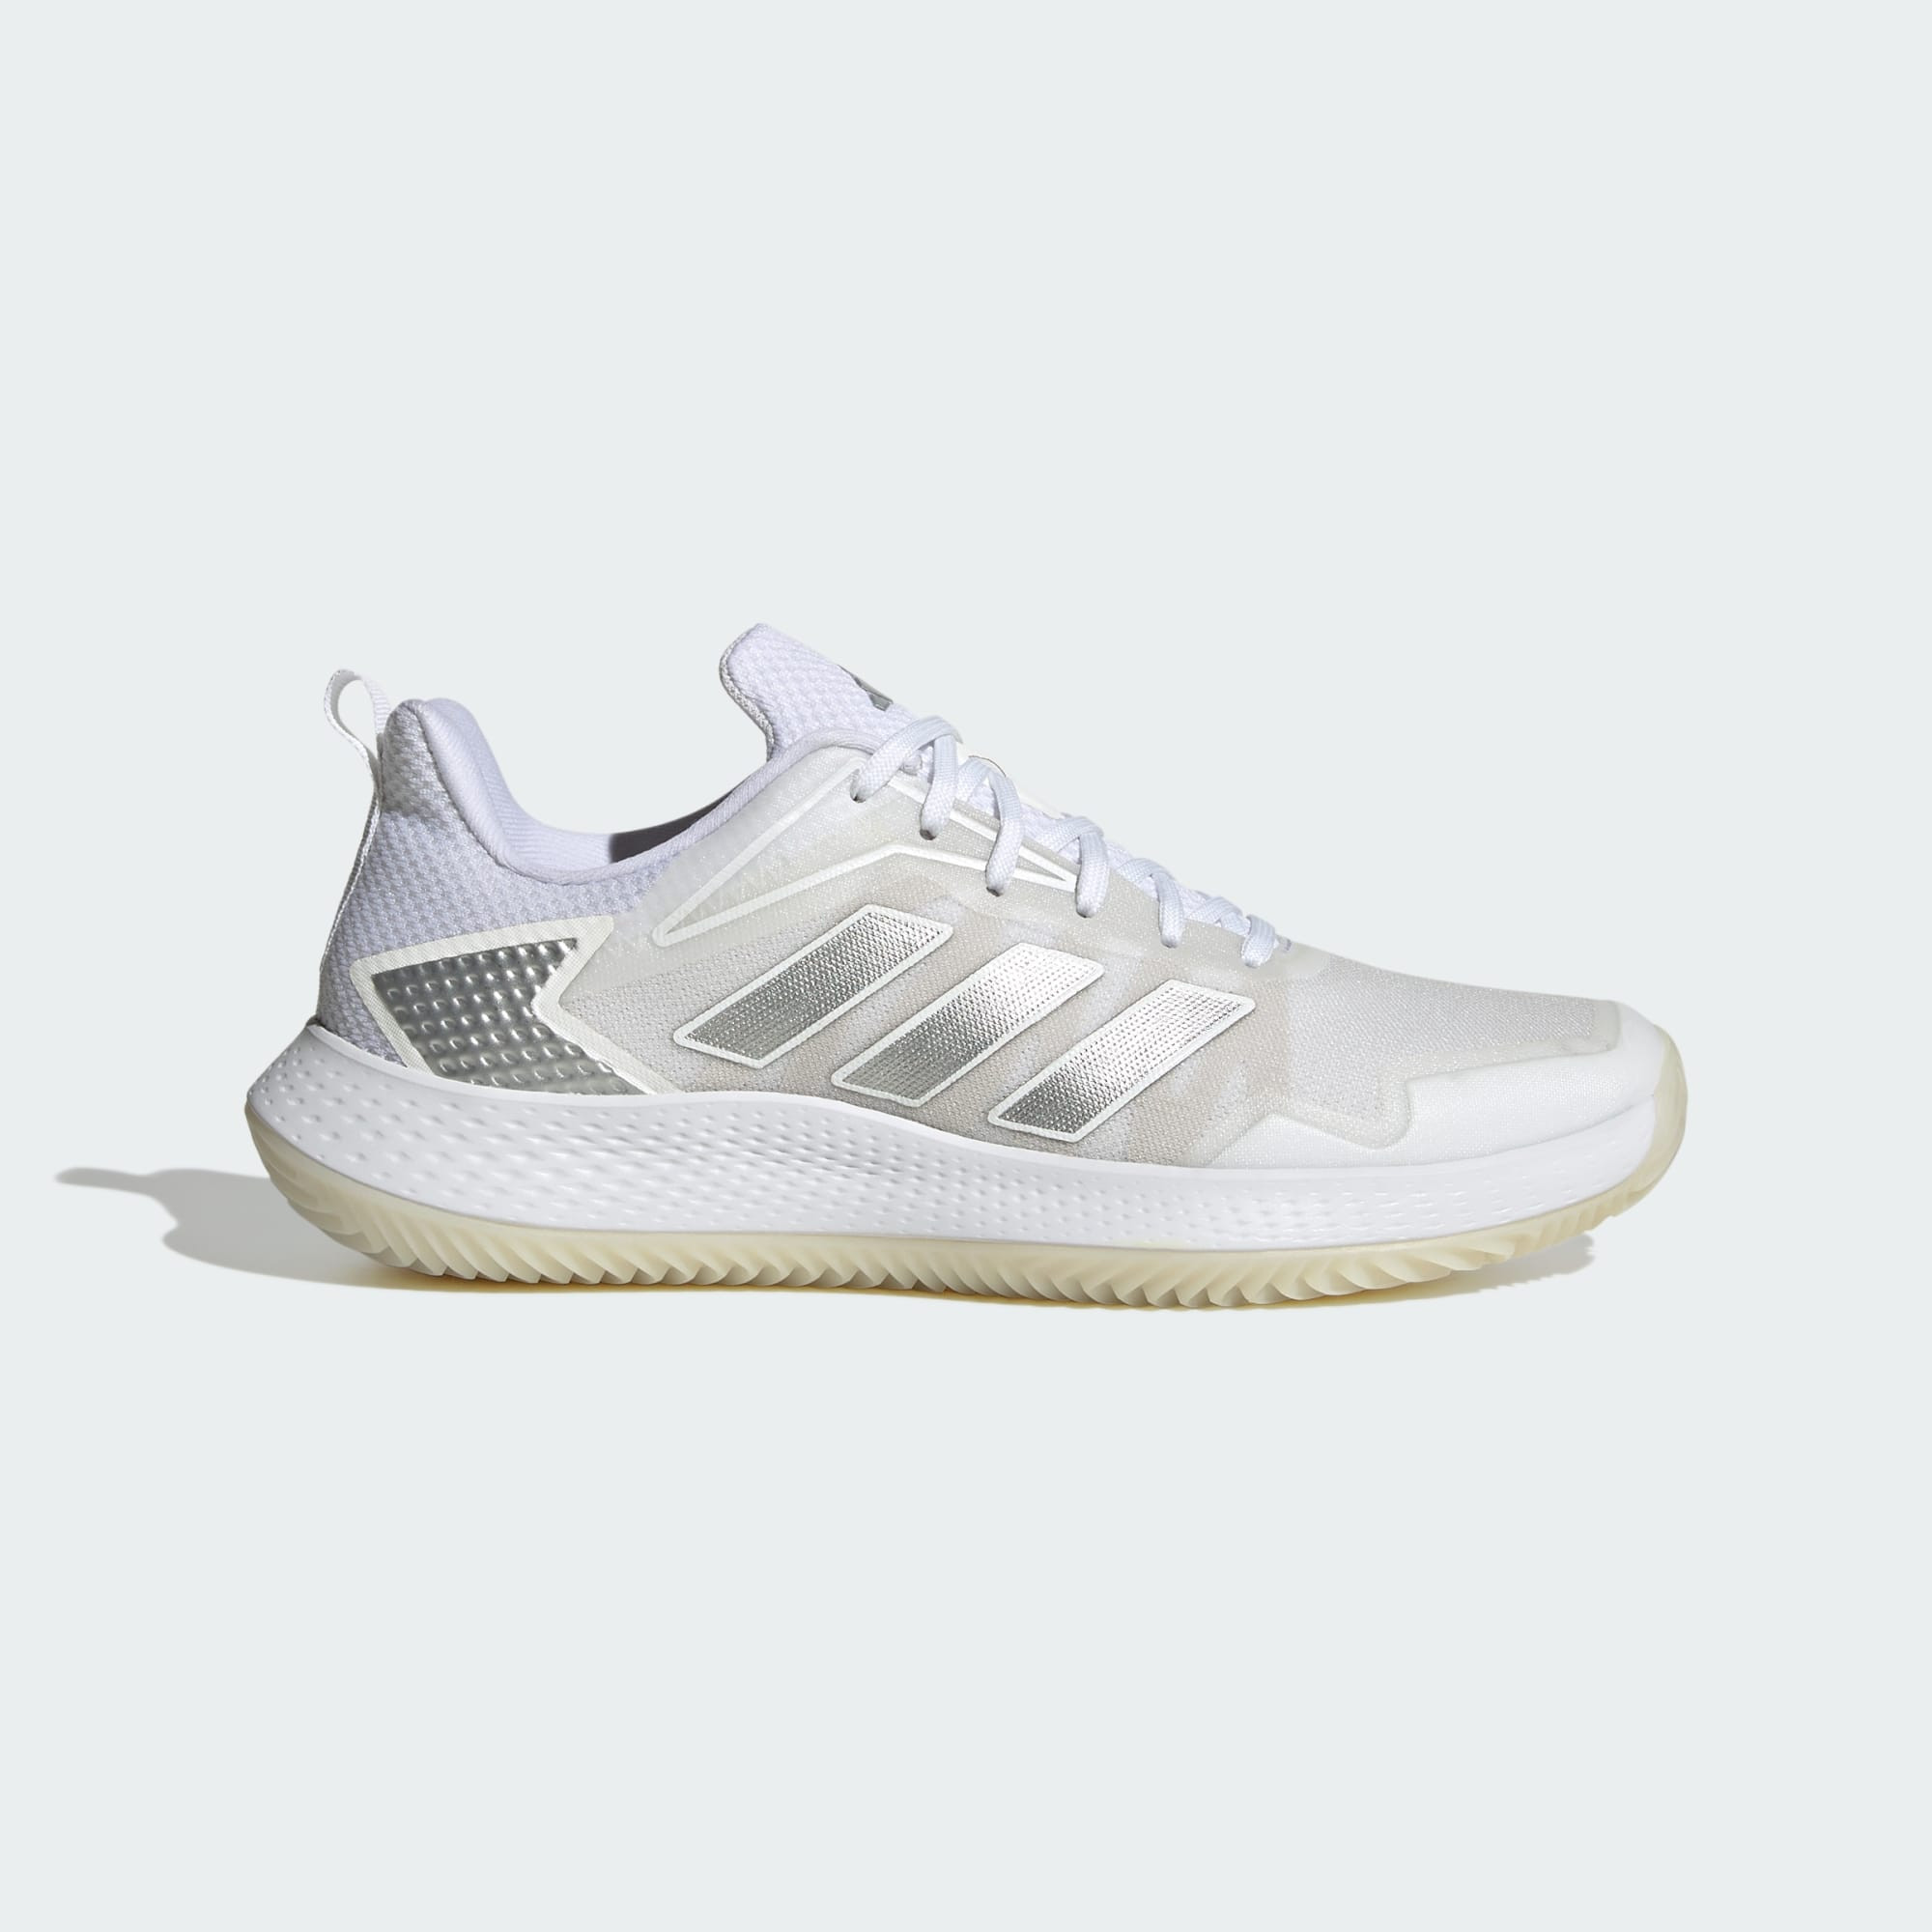 adidas Defiant Speed Clay Tennis Shoes (9000155744_71100)